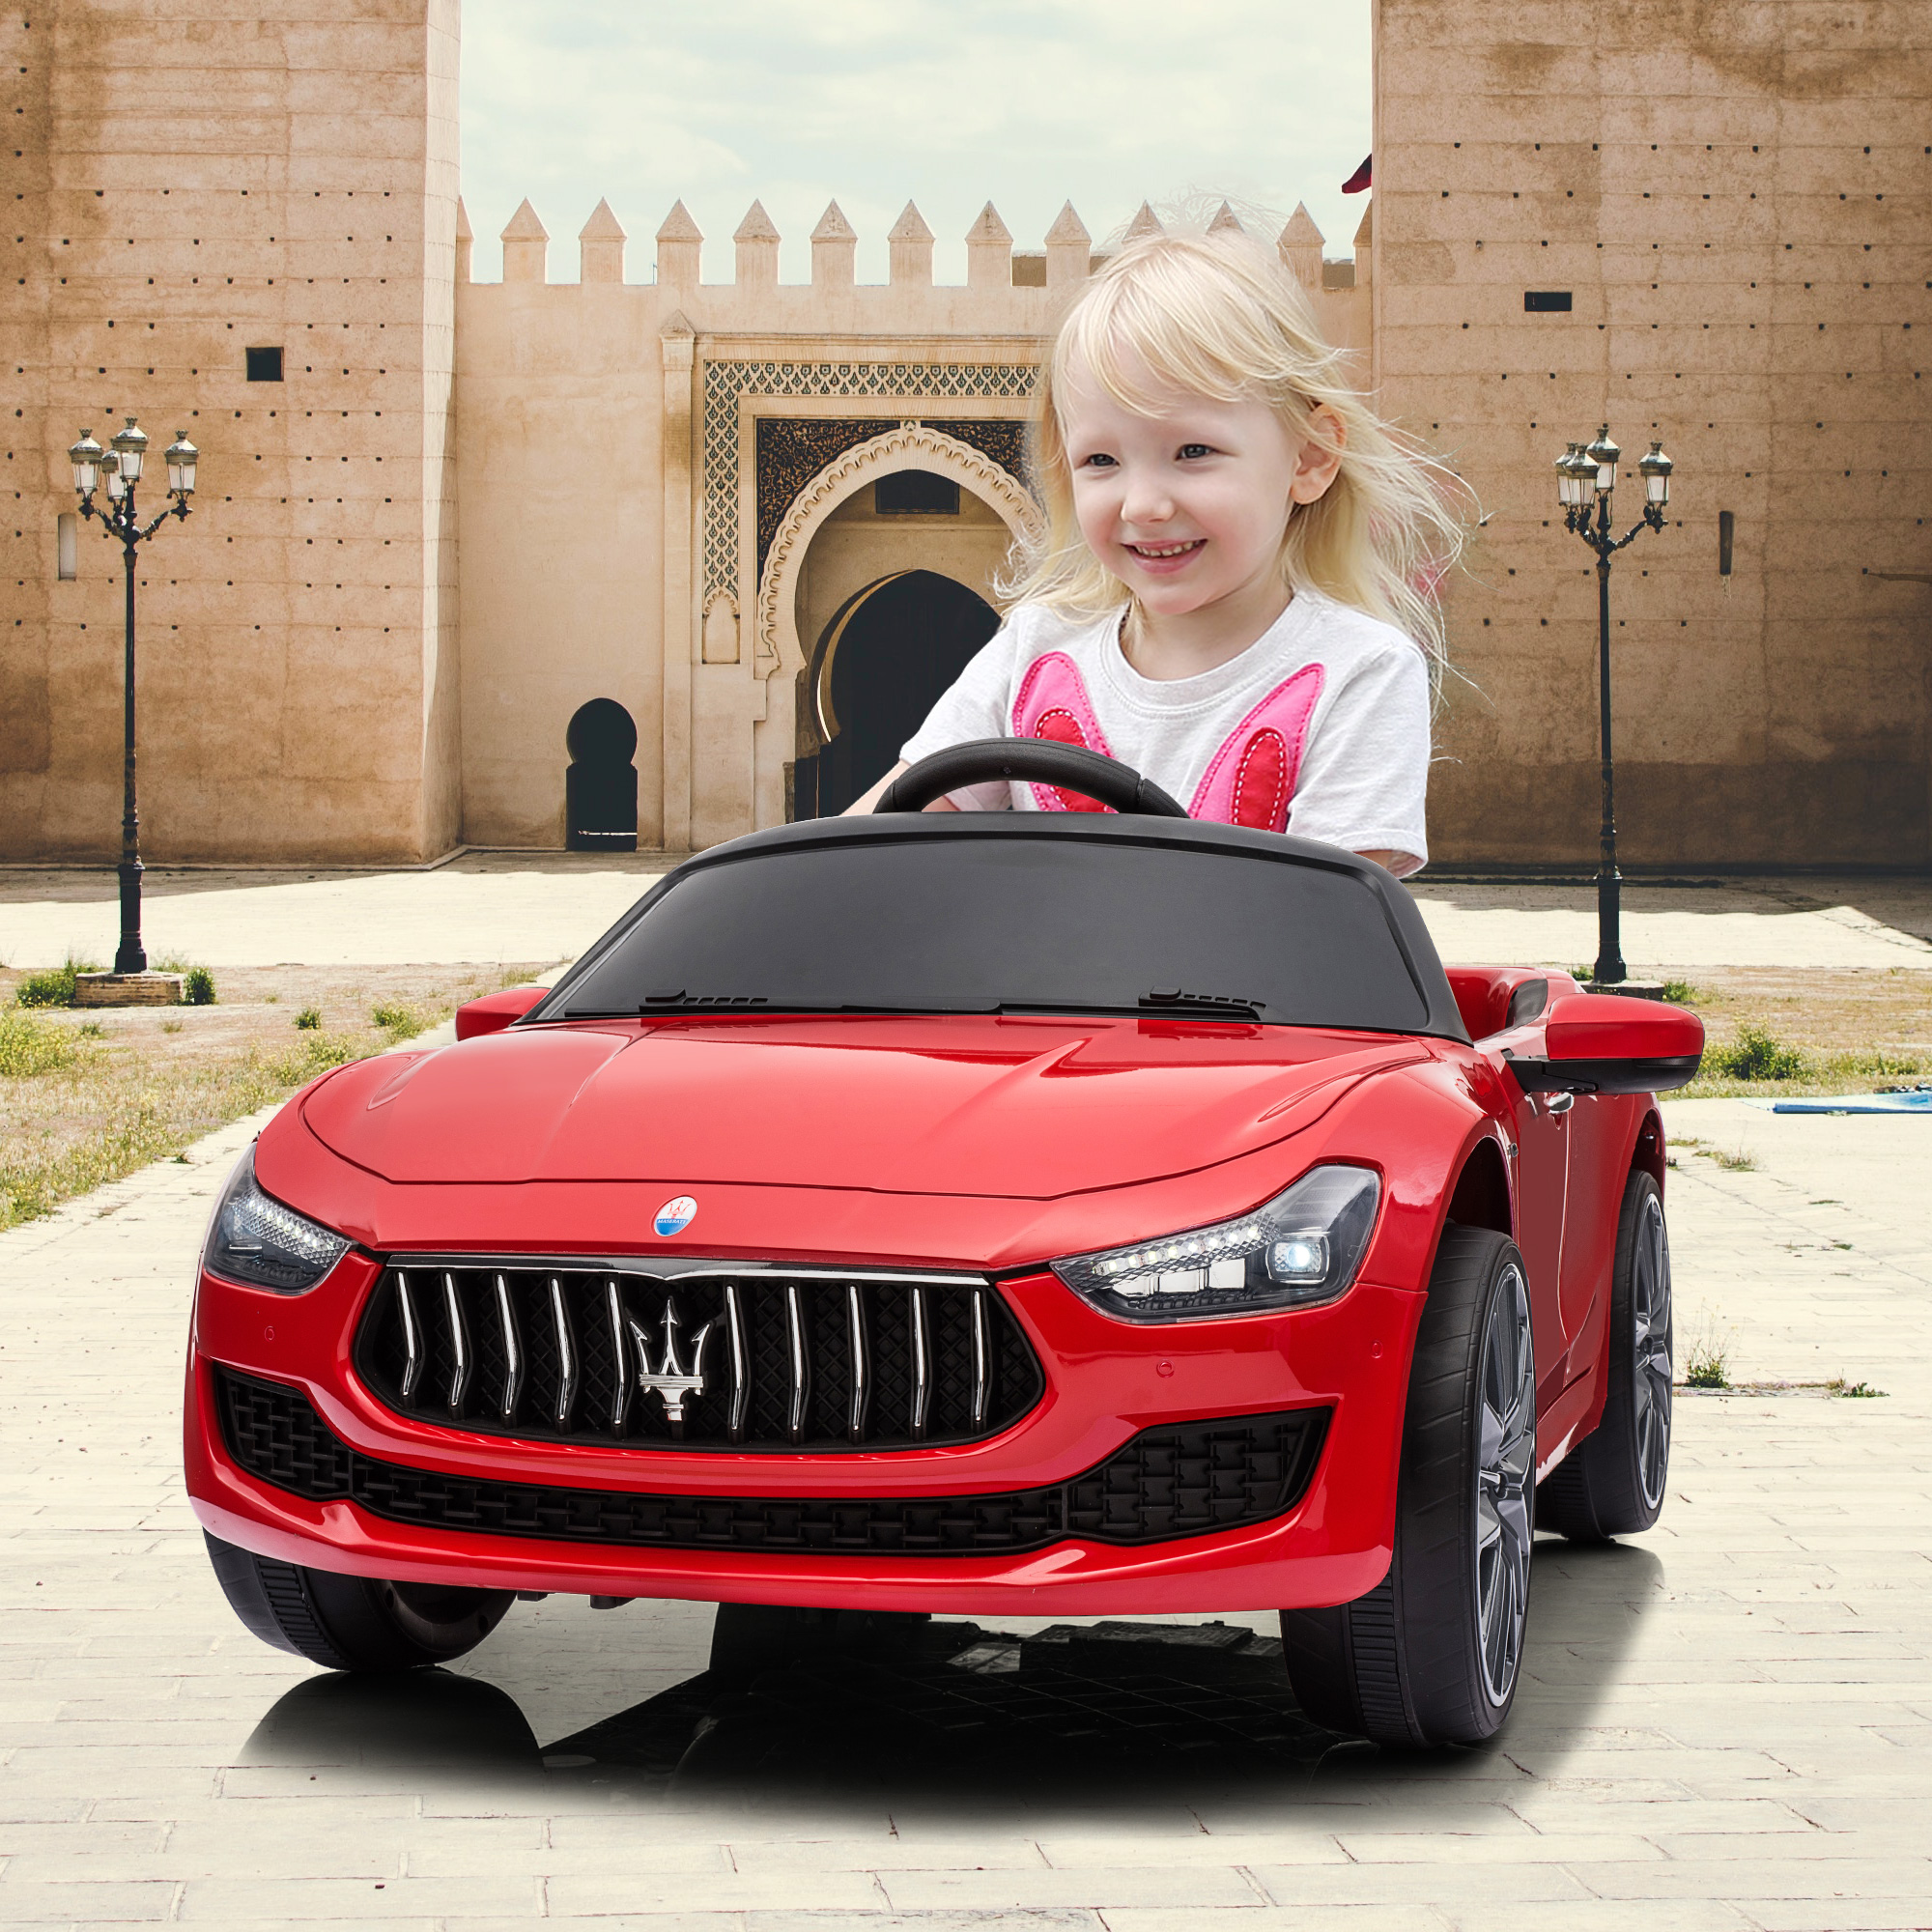 Maserati-Licensed 12V Kids Ride On Car, Electric Vehicle with Remote Control, MP3, USB, Music, Horn, LED Lights, Openable Doors, Red-CASAINC